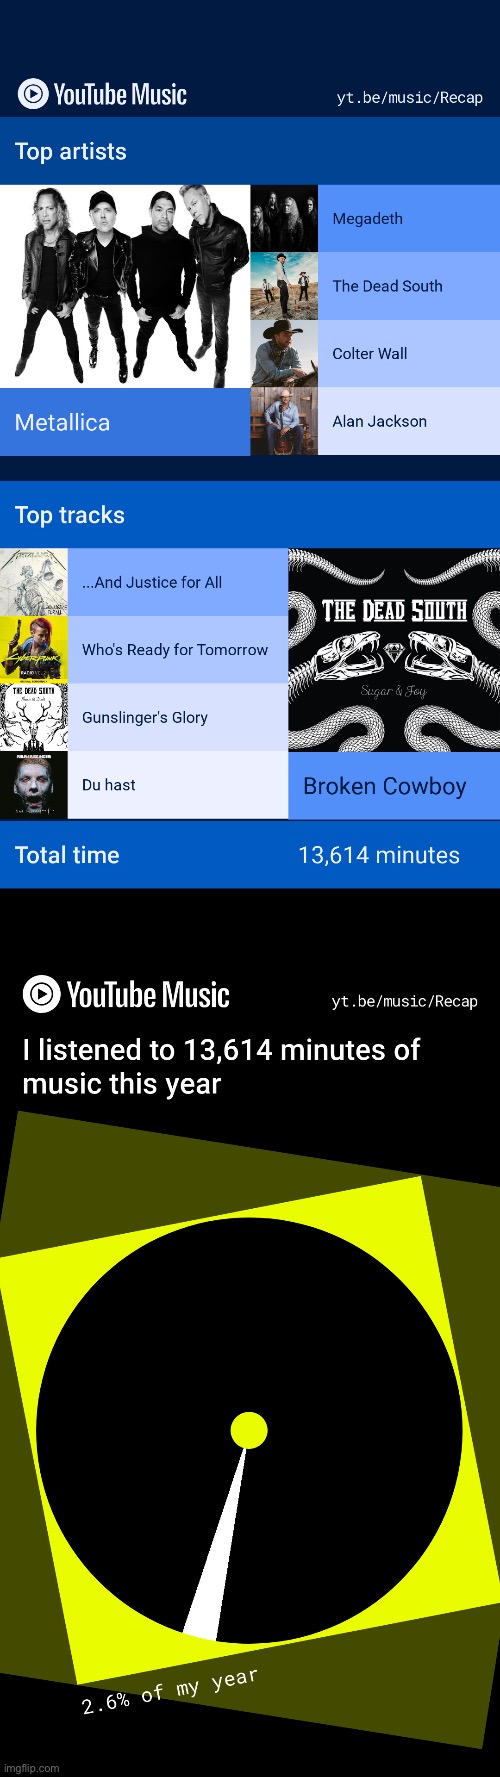 Yes i use YouTube Music | image tagged in music,alan jackson,rammstein,the dead south,metallica | made w/ Imgflip meme maker